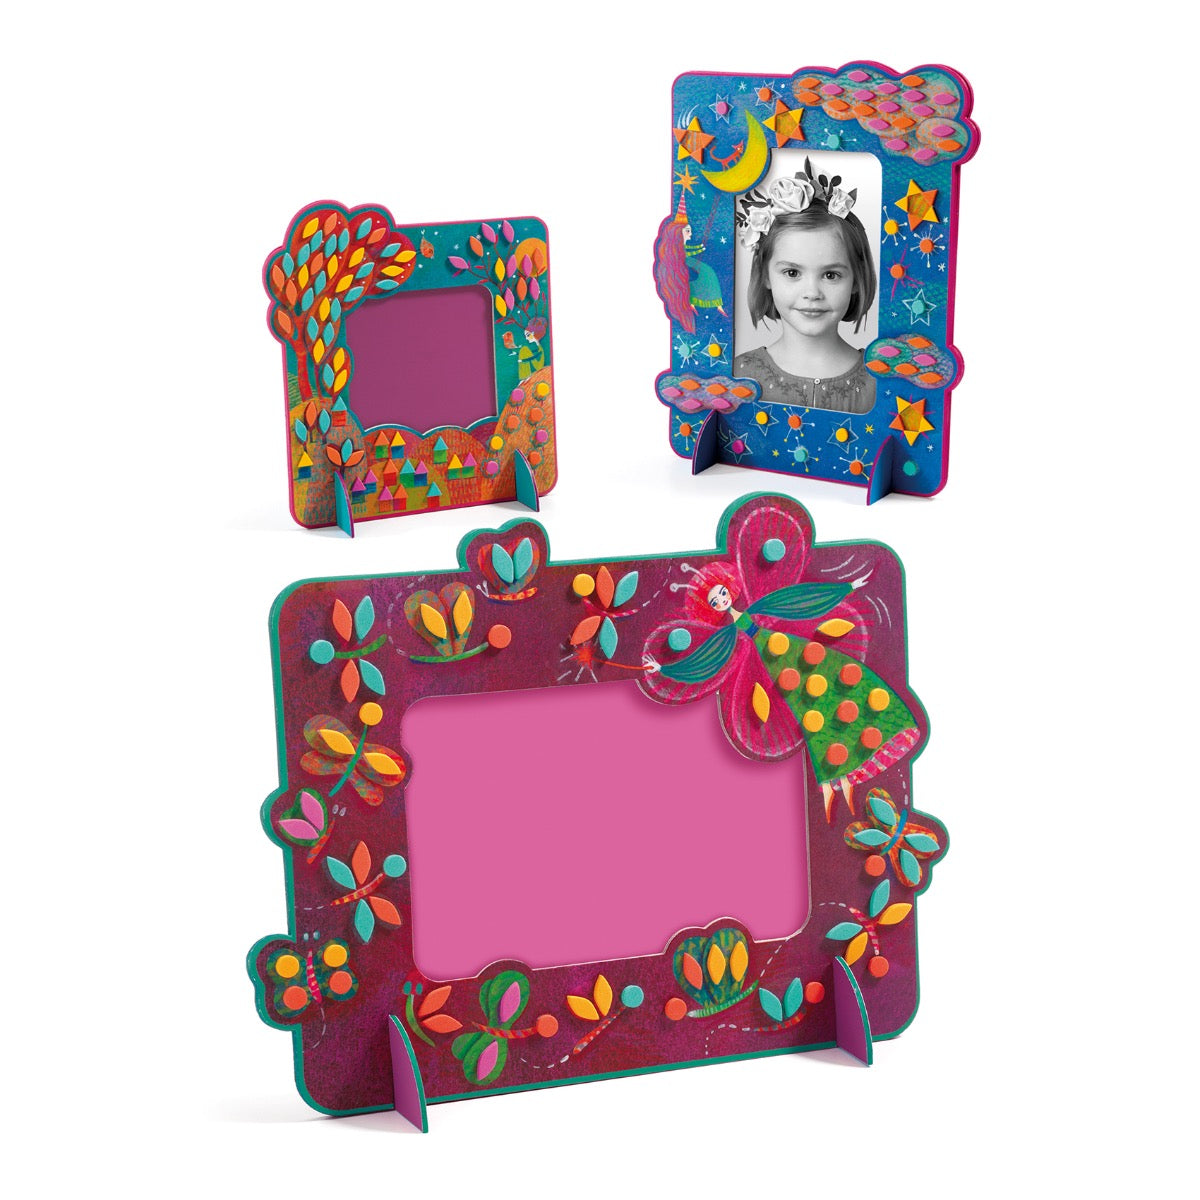 Djeco Do It Yourself Mosaic Photo Frames to Decorate - Fairy